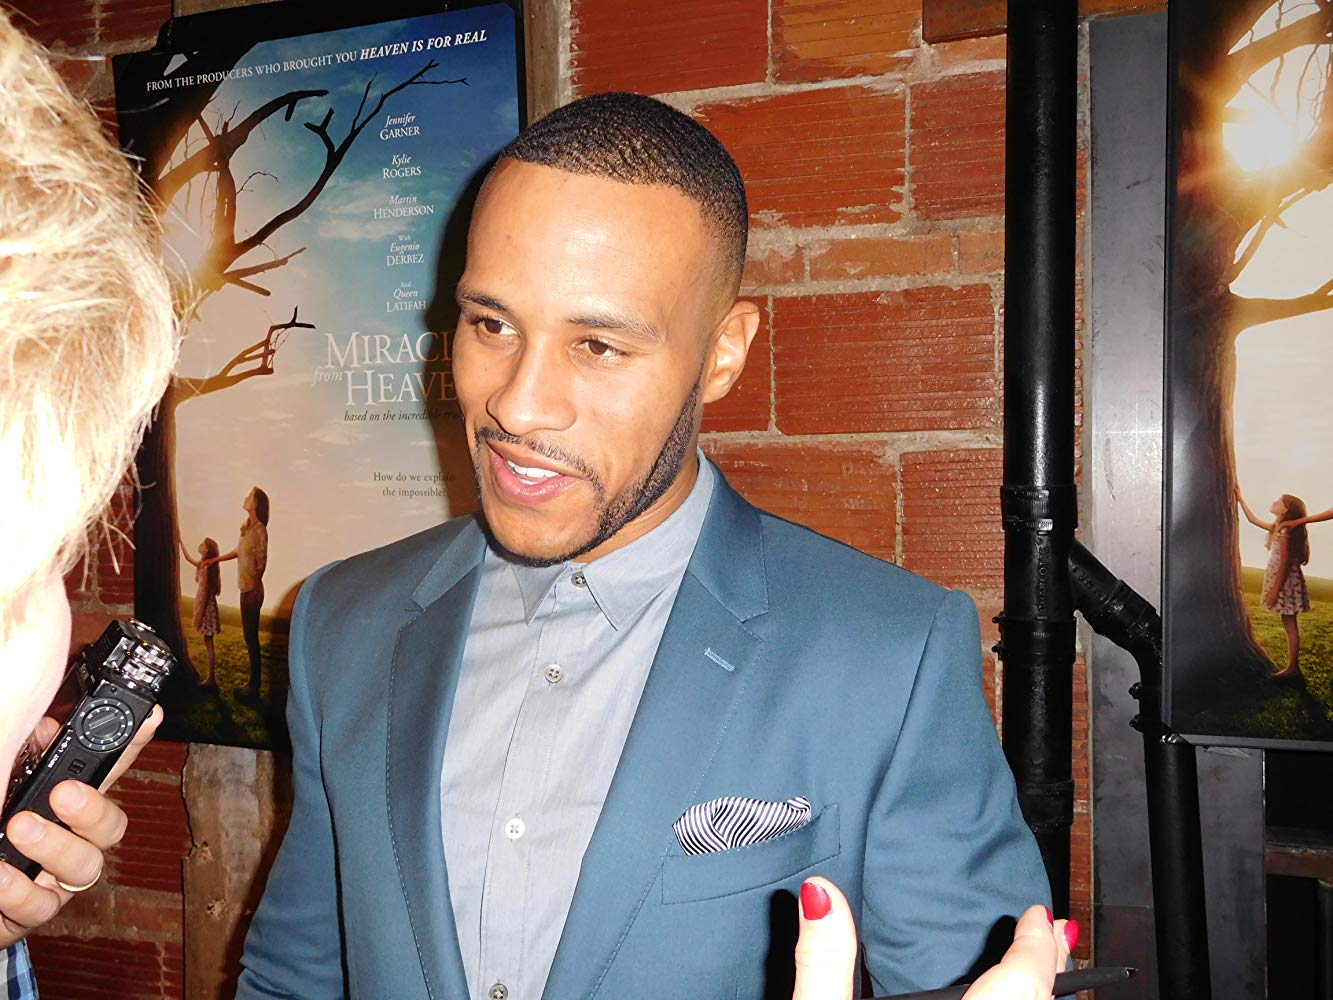 Devon Franklin outside of Miracles from Heaven